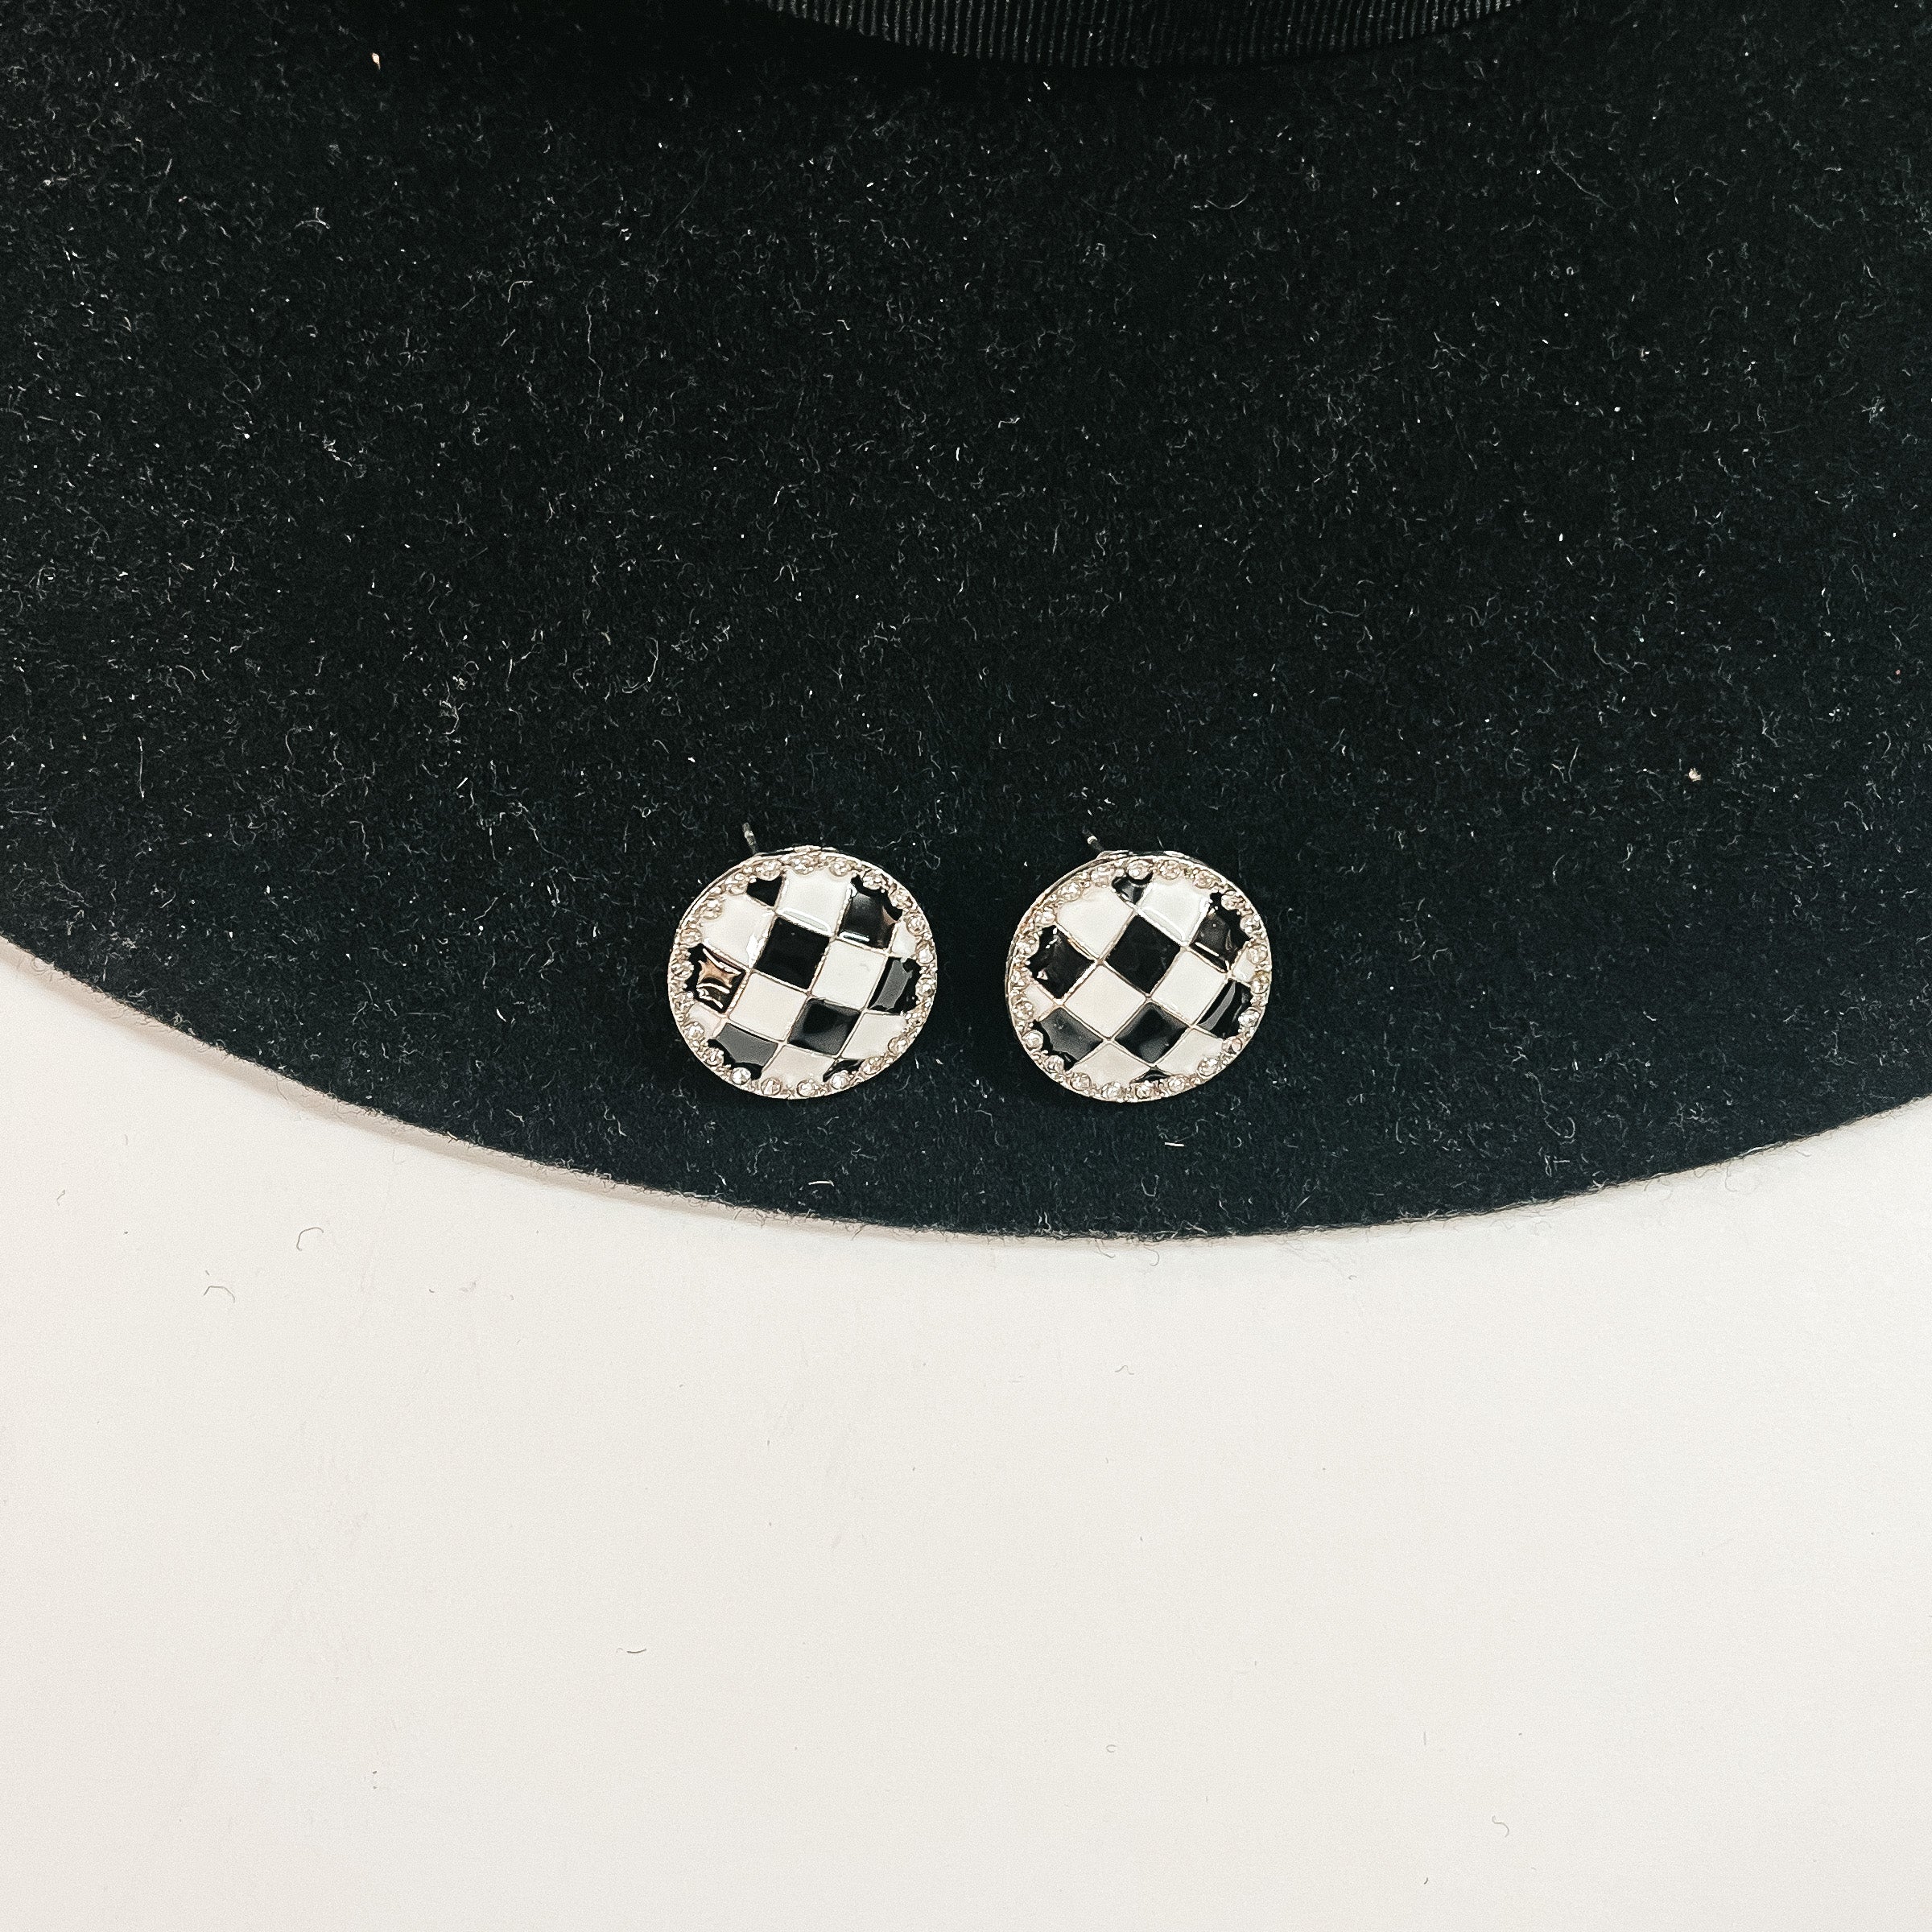 This is a pair of checkered patterned stud earrings in white/black in a gold  setting with clear crystals all around. This pair of earrings is laying on a  black felt hat brim and on a white background.